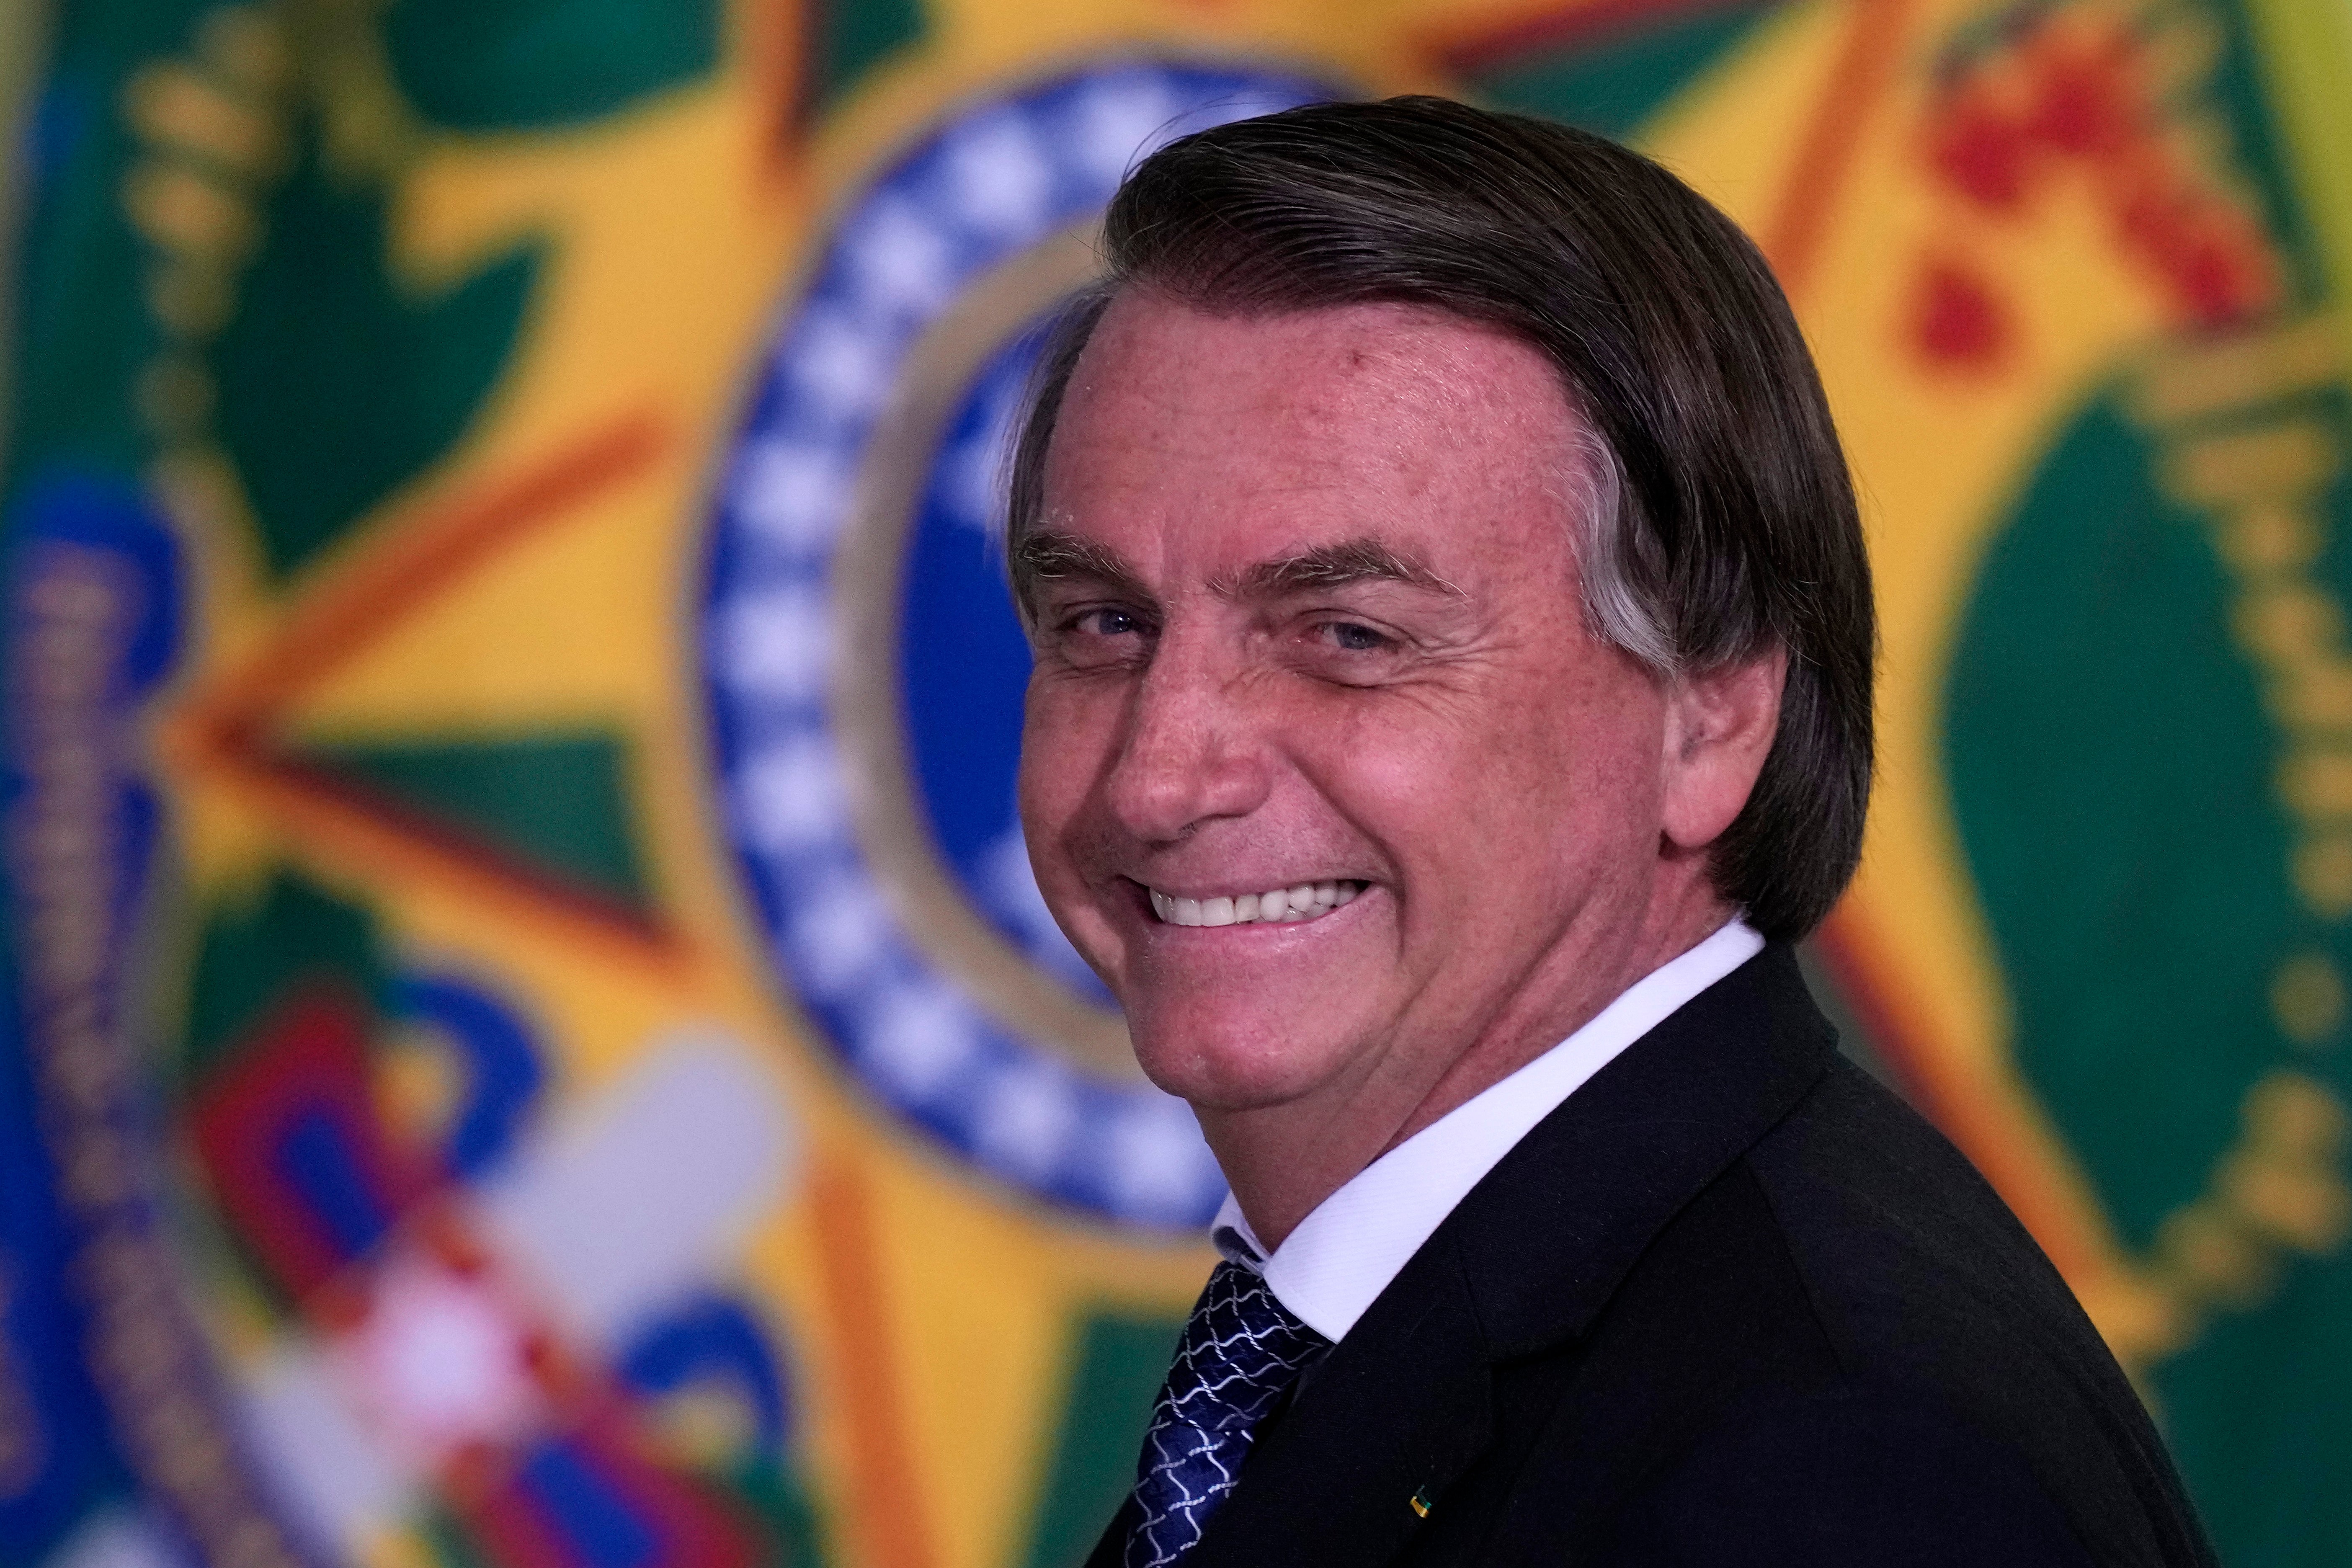 The UK should abandon trade talks until current president Jair Bolsonaro is out of office, the TUC contends.